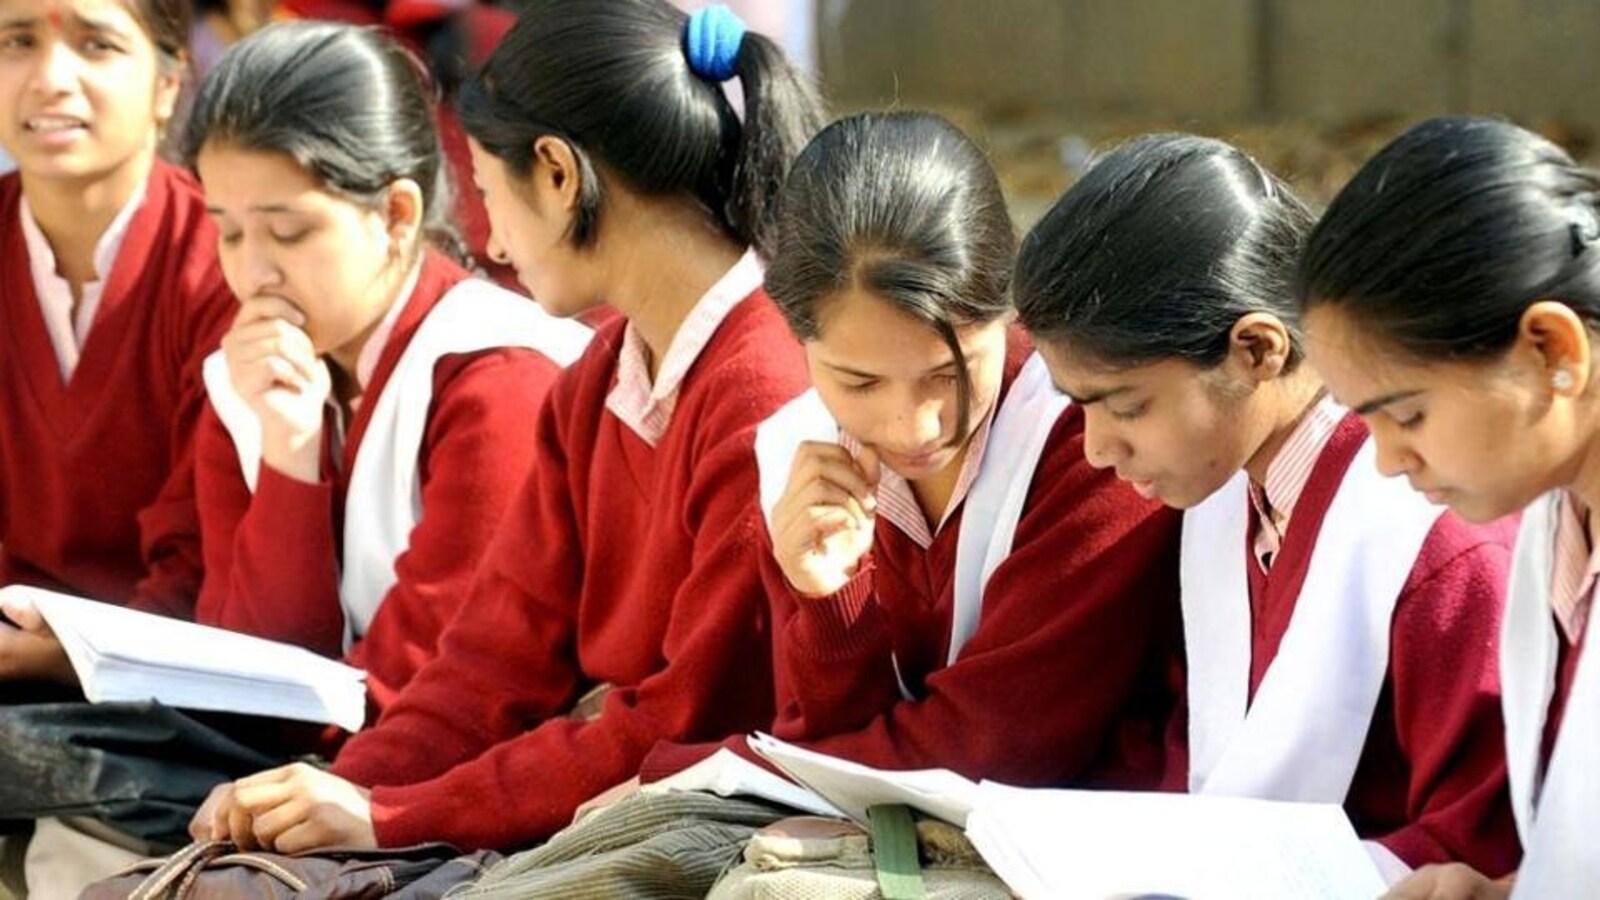 UP Board Exams 2023 Live: UPMSP 10th 12th Time Table latest updates